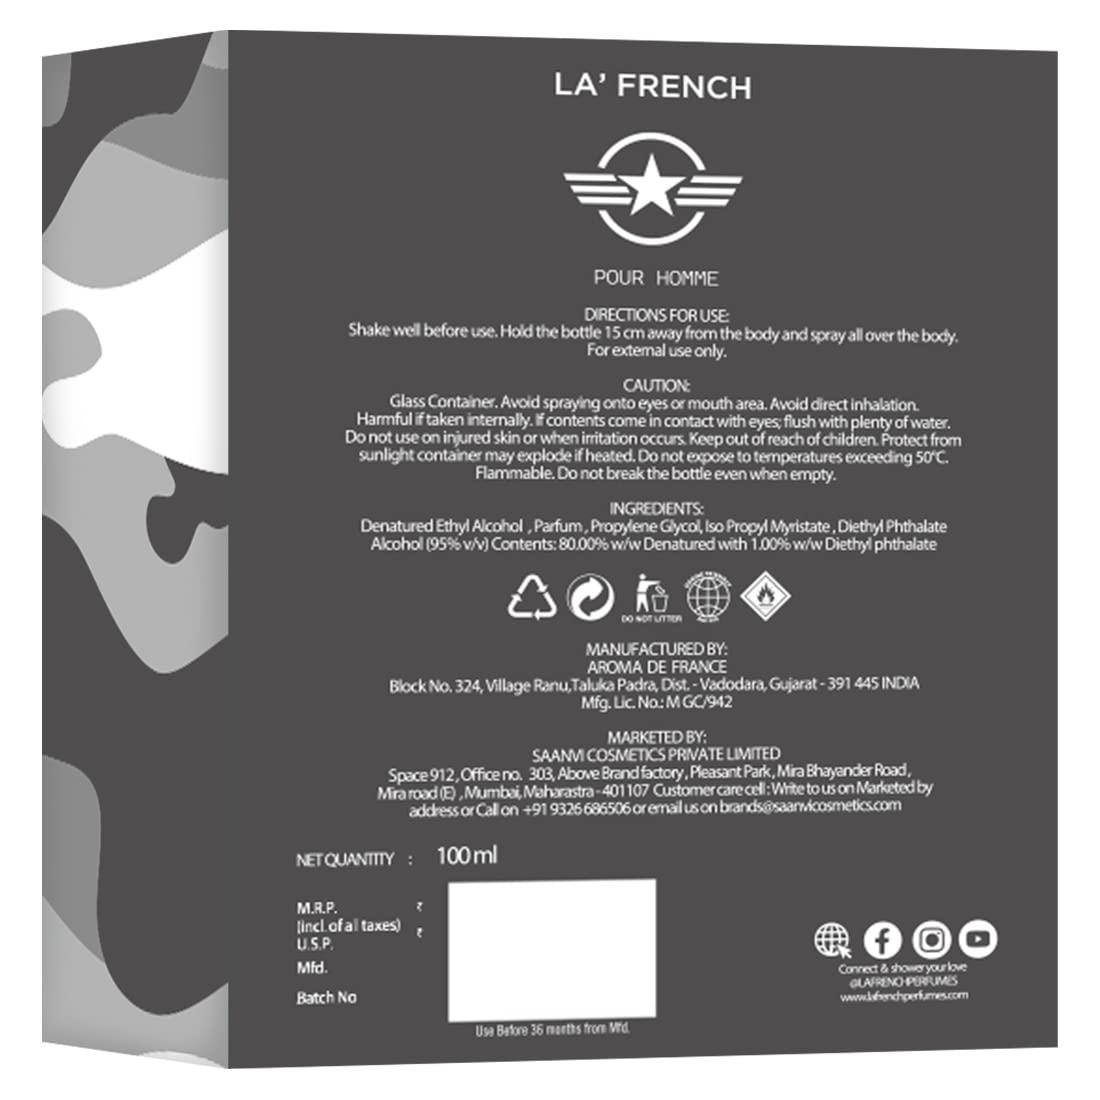 La French War Zone Perfume for Men - 100ml | Luxury Gift | Extra Long Lasting Smell | Premium French Fragrance Scent | Eau De Parfum